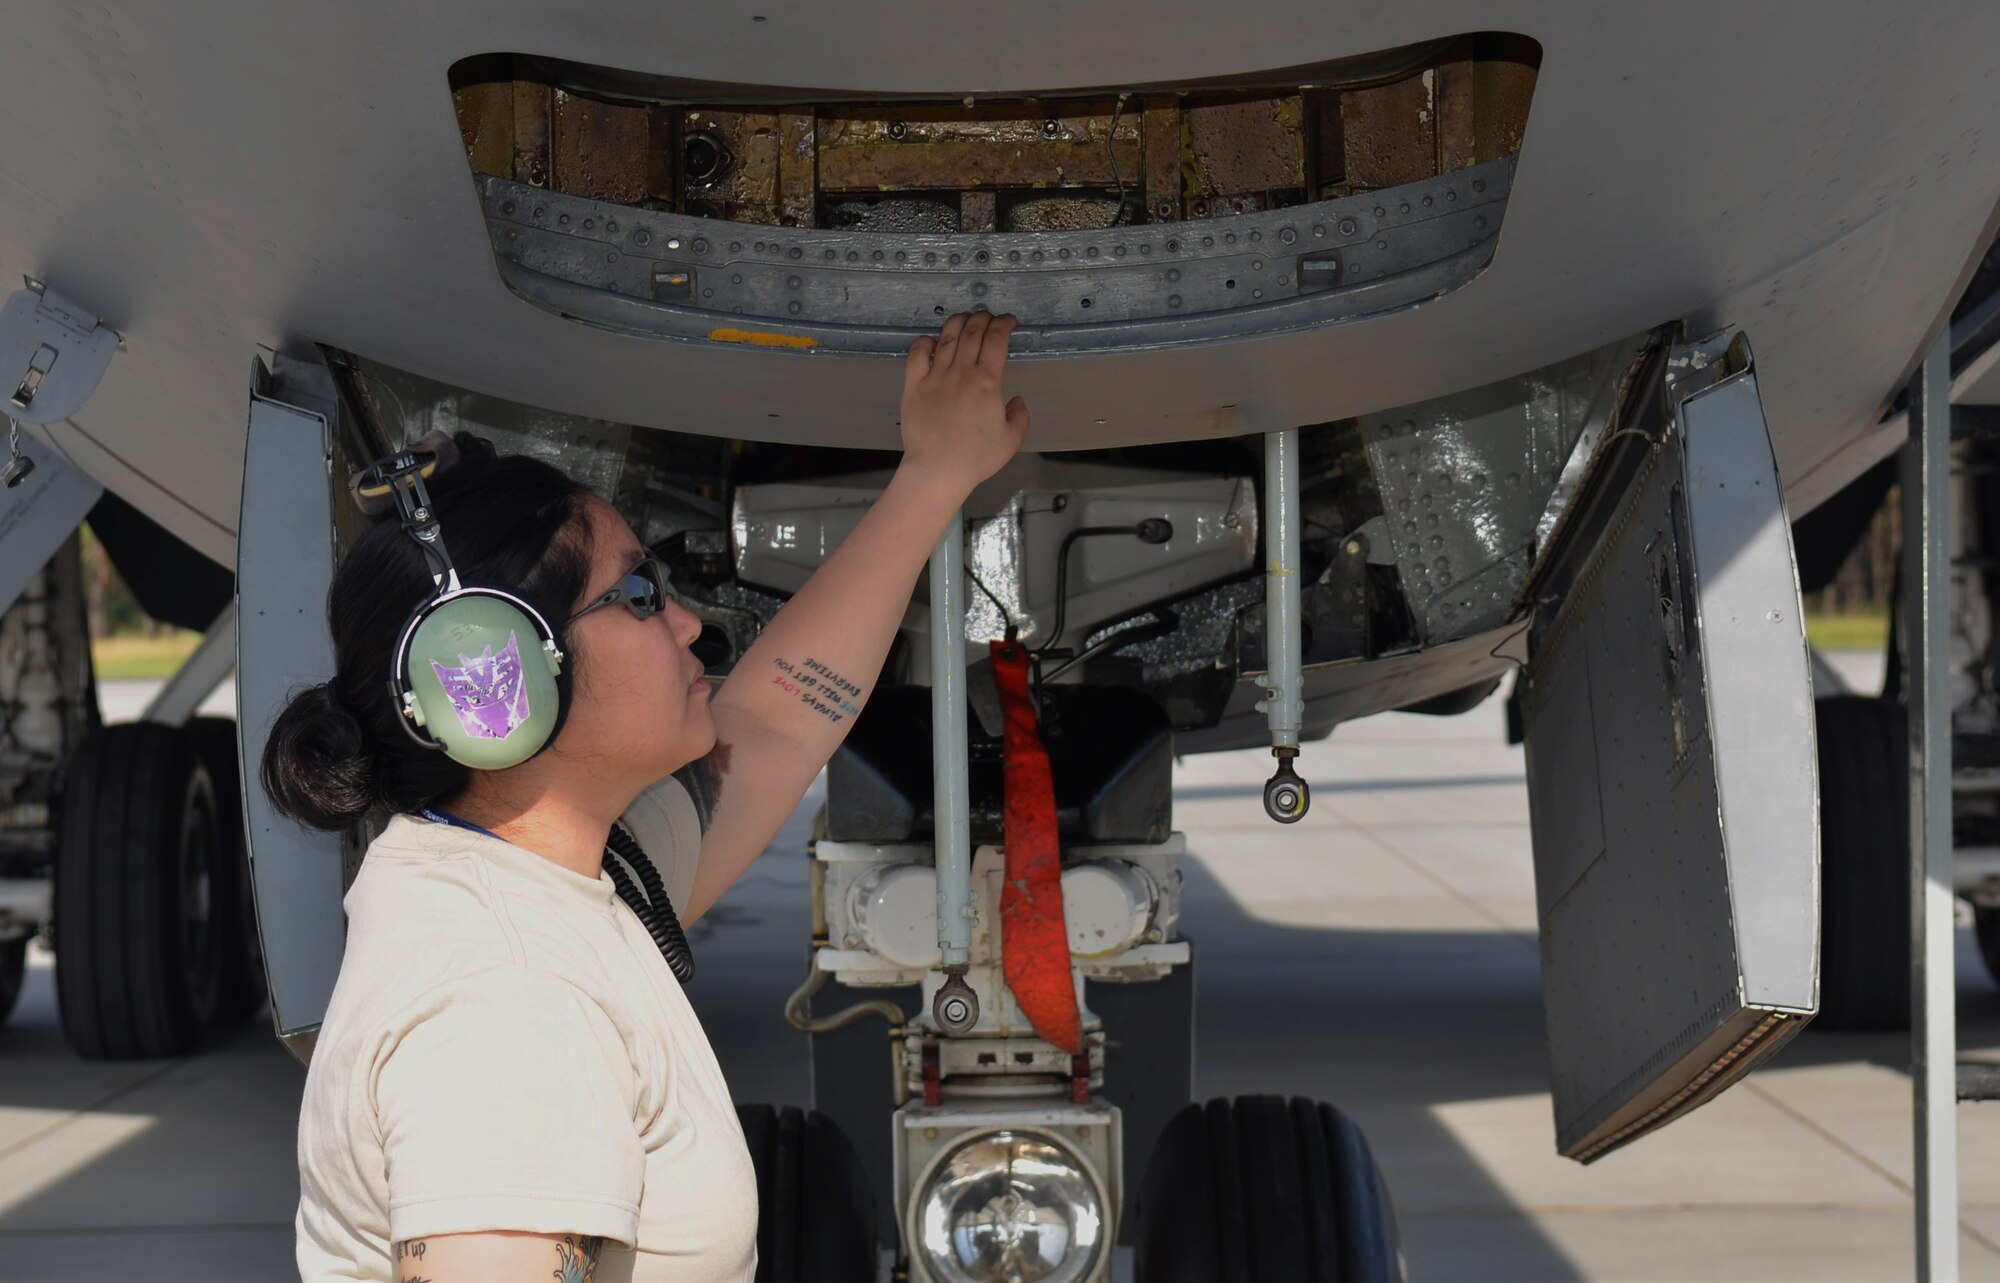 U.S. Air Force Staff Sgt. Erica Northam, 351st Expeditionary Air Refueling Squadron-Poland communication and navigation craftsman from Juneau, Alaska, inspects a KC-135 Stratotanker before a Baltic Operations Exercise flight June 11, 2014, on Powidz Air Base, Poland. Celebrating its 42nd year, the BALTOPS Exercise aims to improve security in the Baltic Sea through cooperation among regional allies. (U.S. Air Force photo/Airman 1st Class Kyla Gifford/Released)